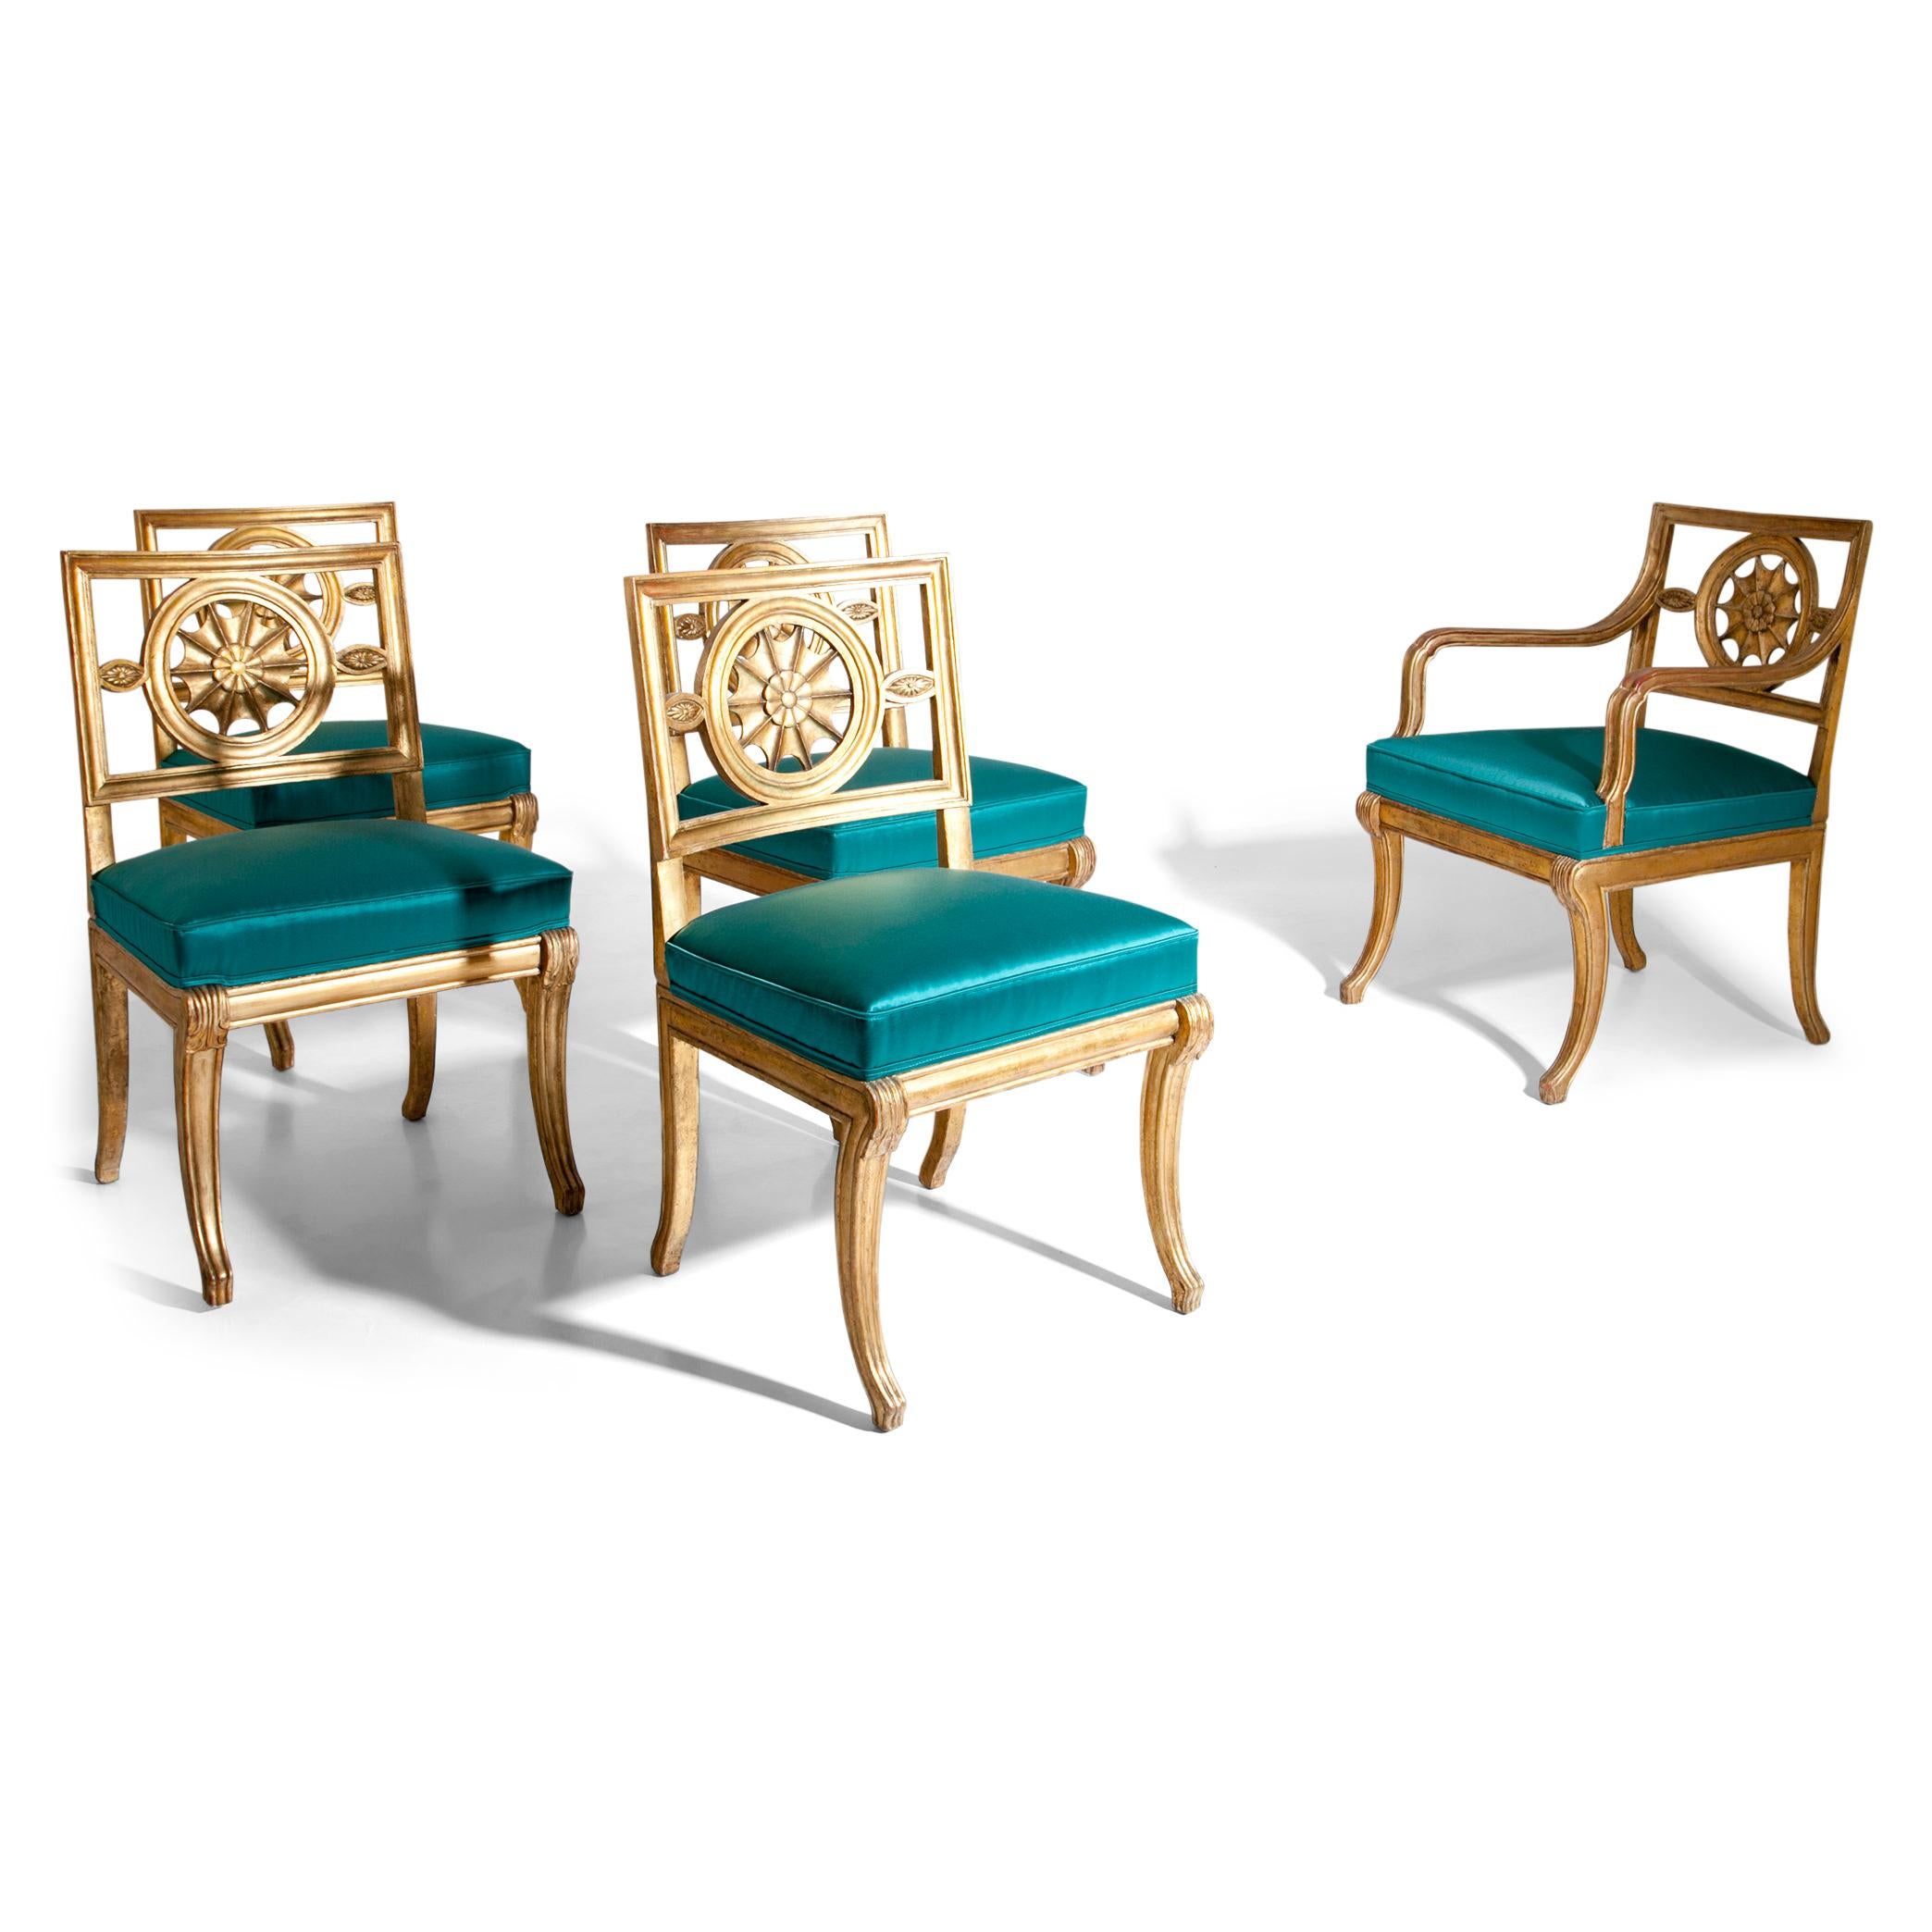 Neoclassical Chairs, Berlin First Half of the 19th Century 2